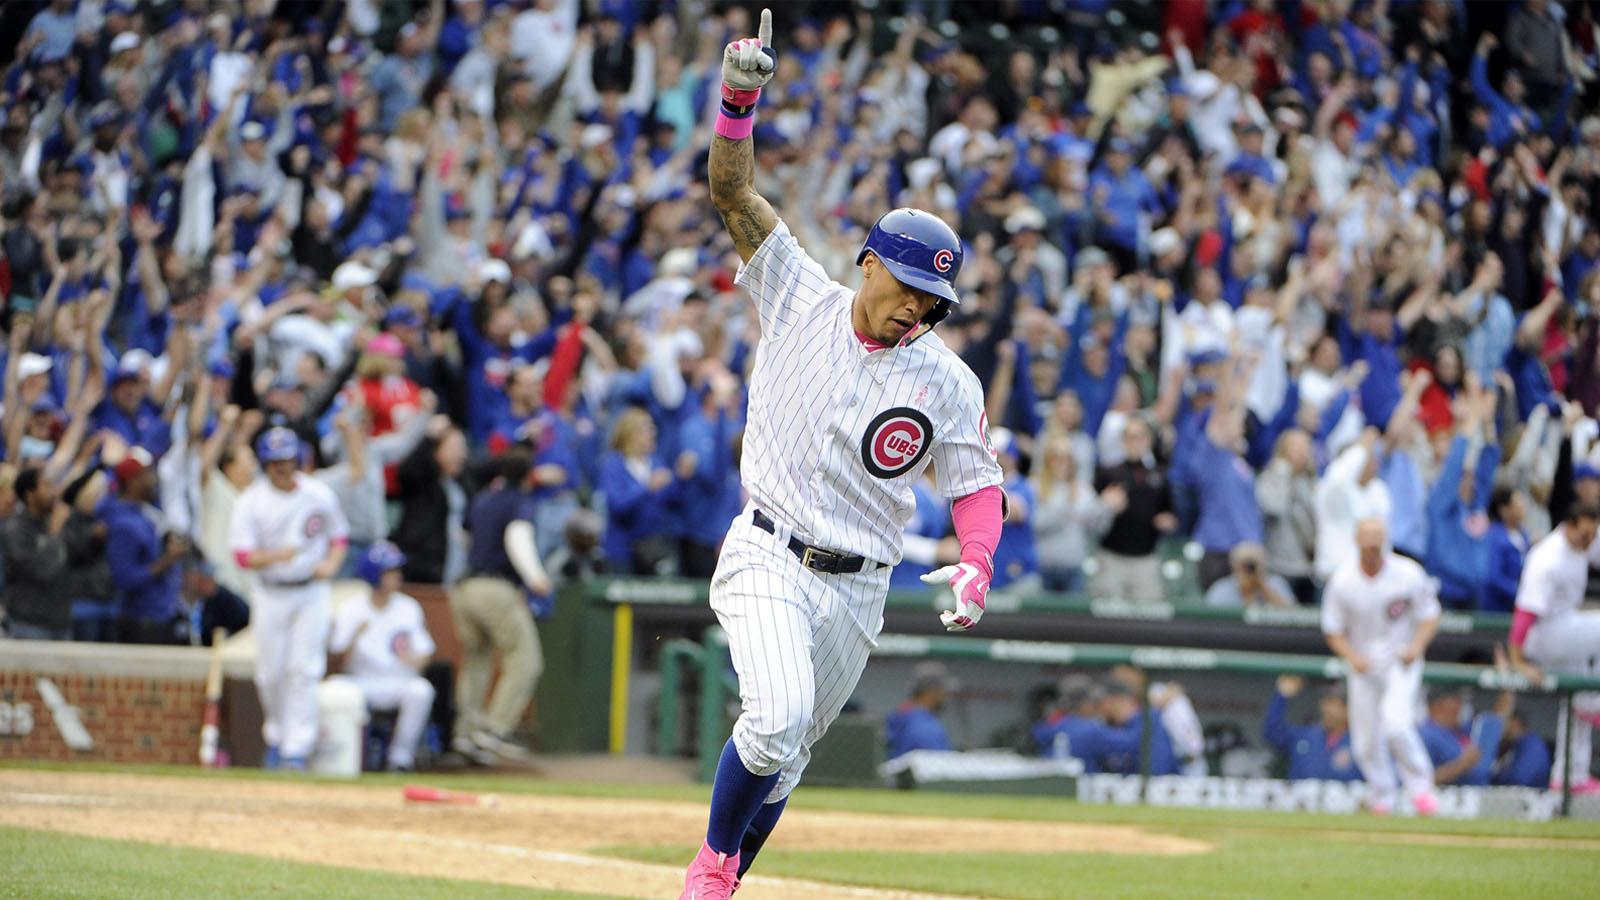 The Cubs have trade chips, but Javier Baez is not one of them. FOX